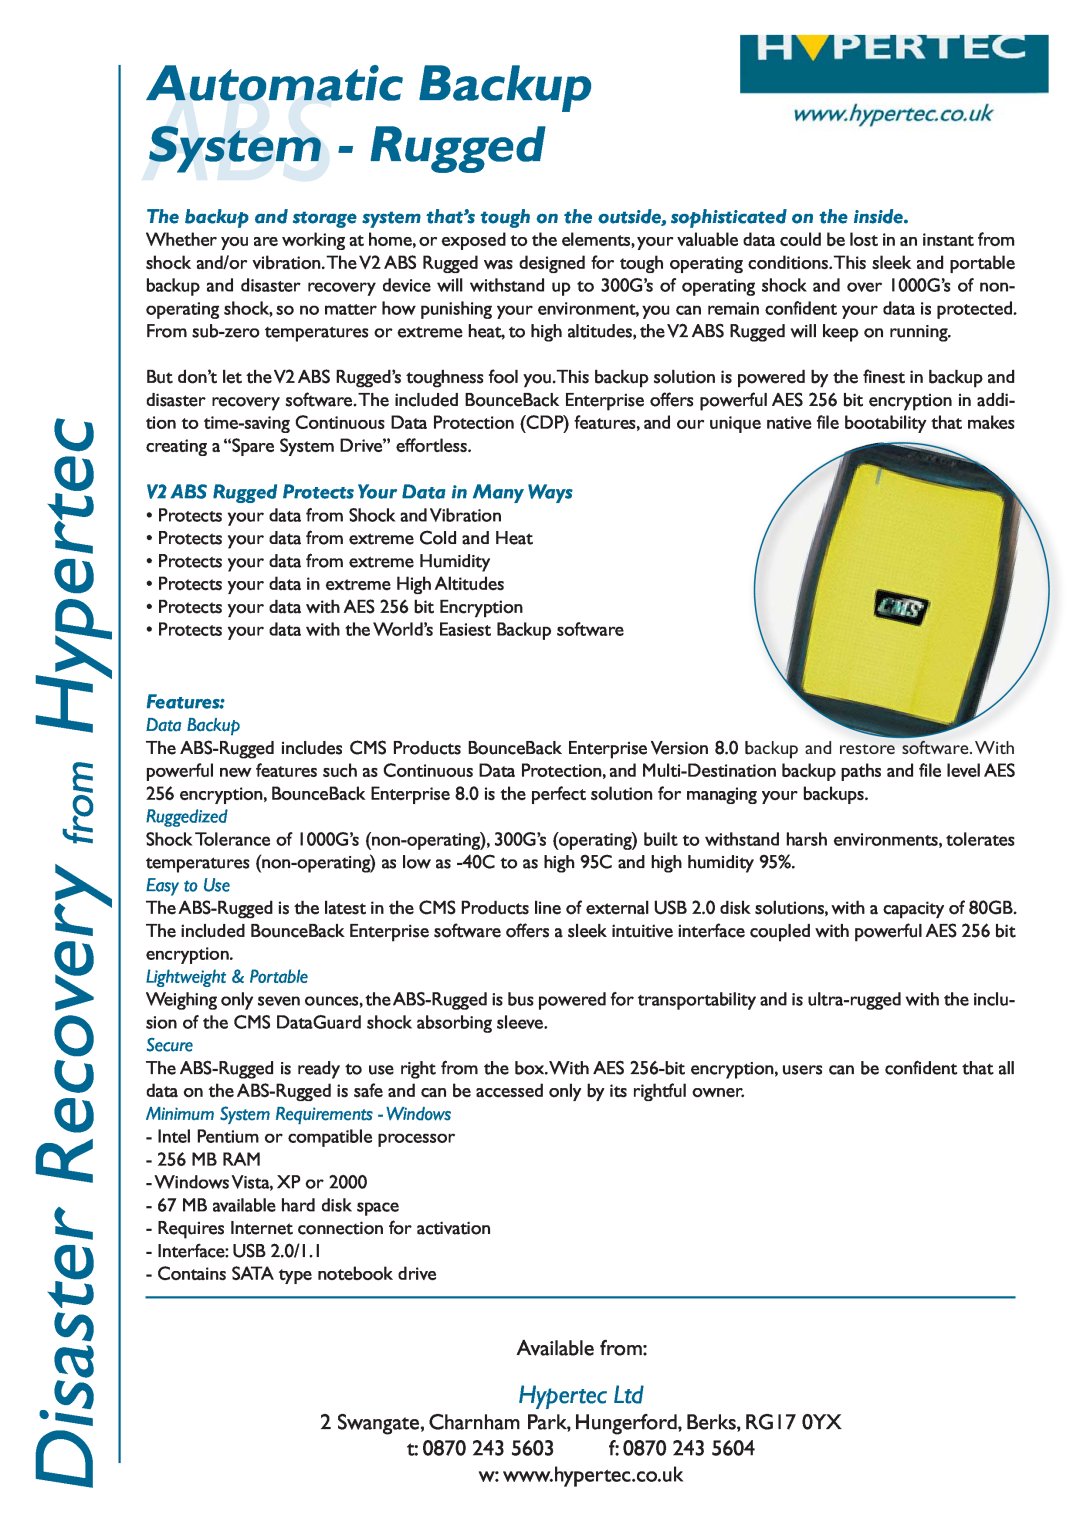 Hypertec V2 ABS manual Disaster Recovery from Hypertec, Automatic Backup ABSSystem - Rugged, Available from, t 0870 243 